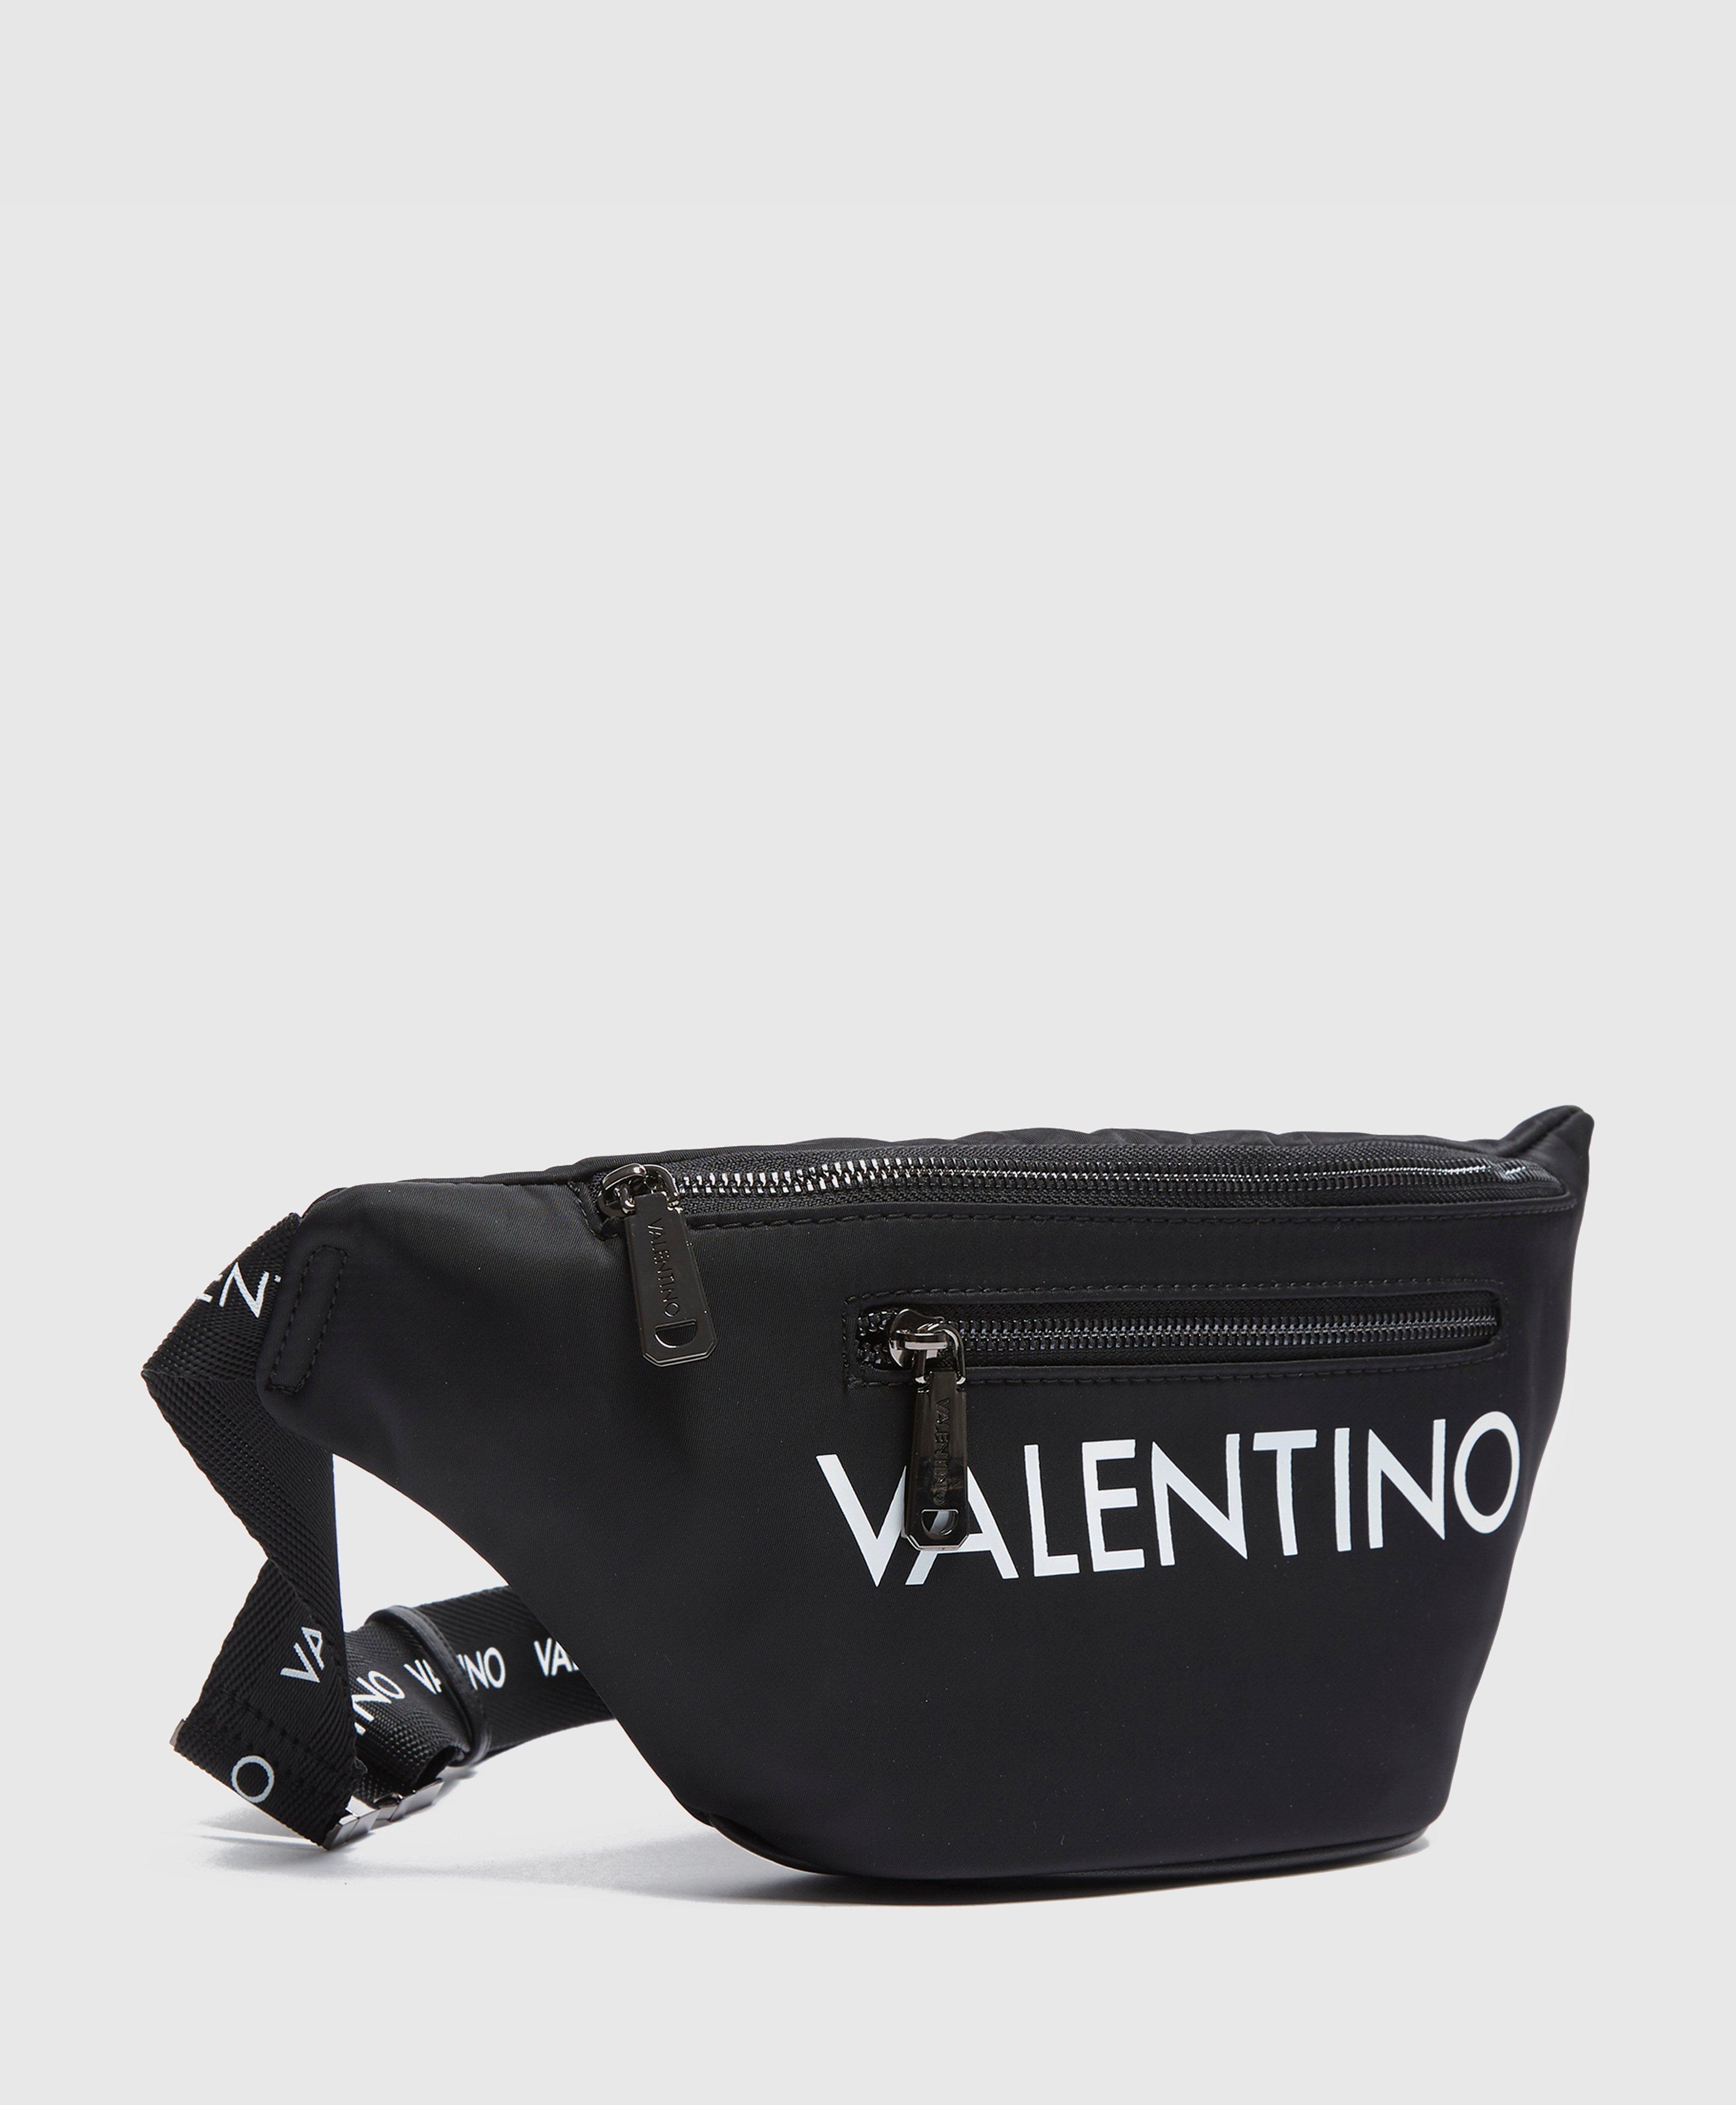 Valentino By Mario Valentino Leather Kylo Bum Bag in Black for Men - Lyst